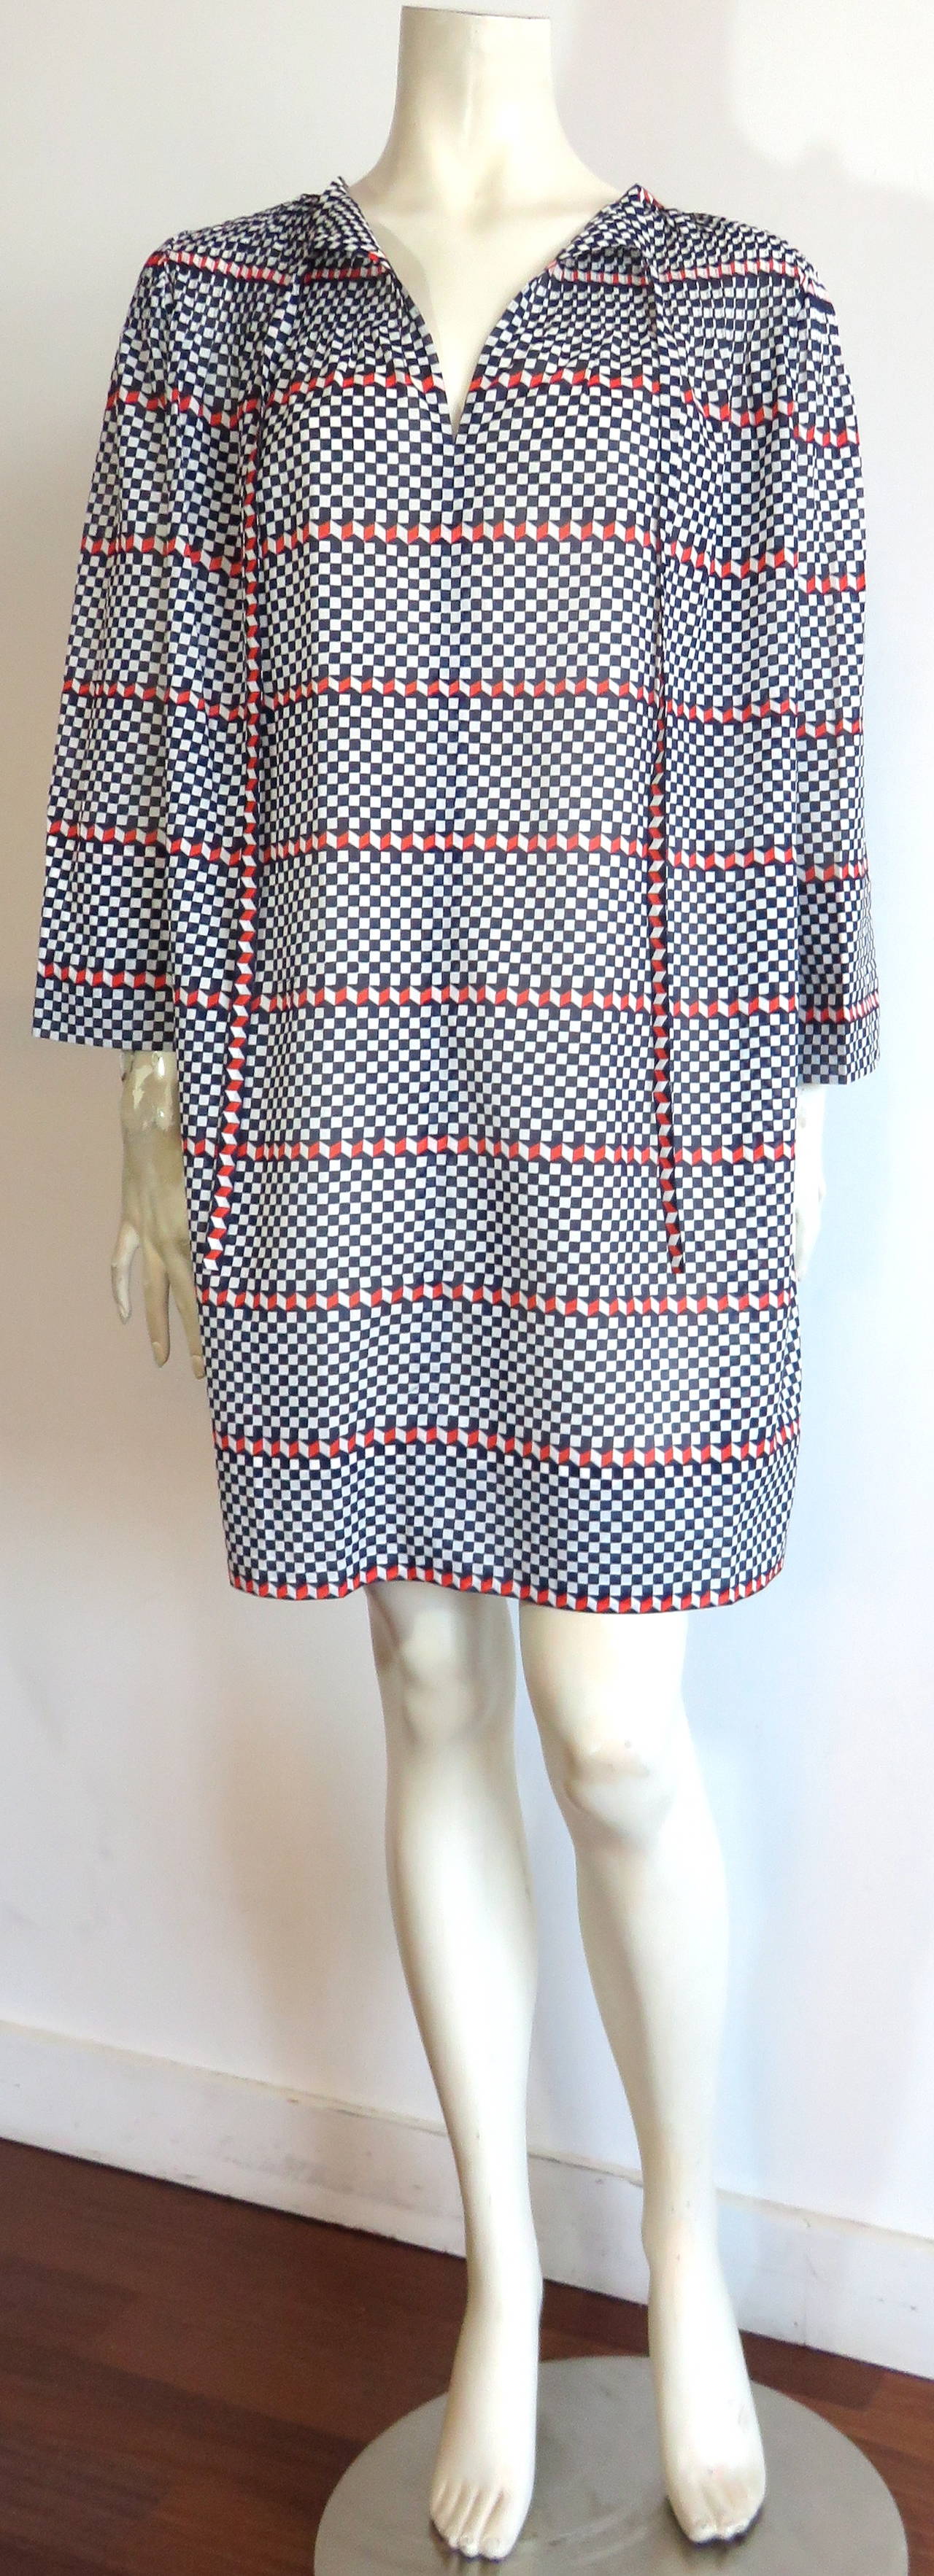 Never worn, 1970's GIVENCHY Haute Couture cotton/silk check tunic.

This fabulous tunic features dark, navy-blue, white, and dark, tangerine checked, artwork print, with regimented chevron style stripes within the pattern.

The top, shoulder